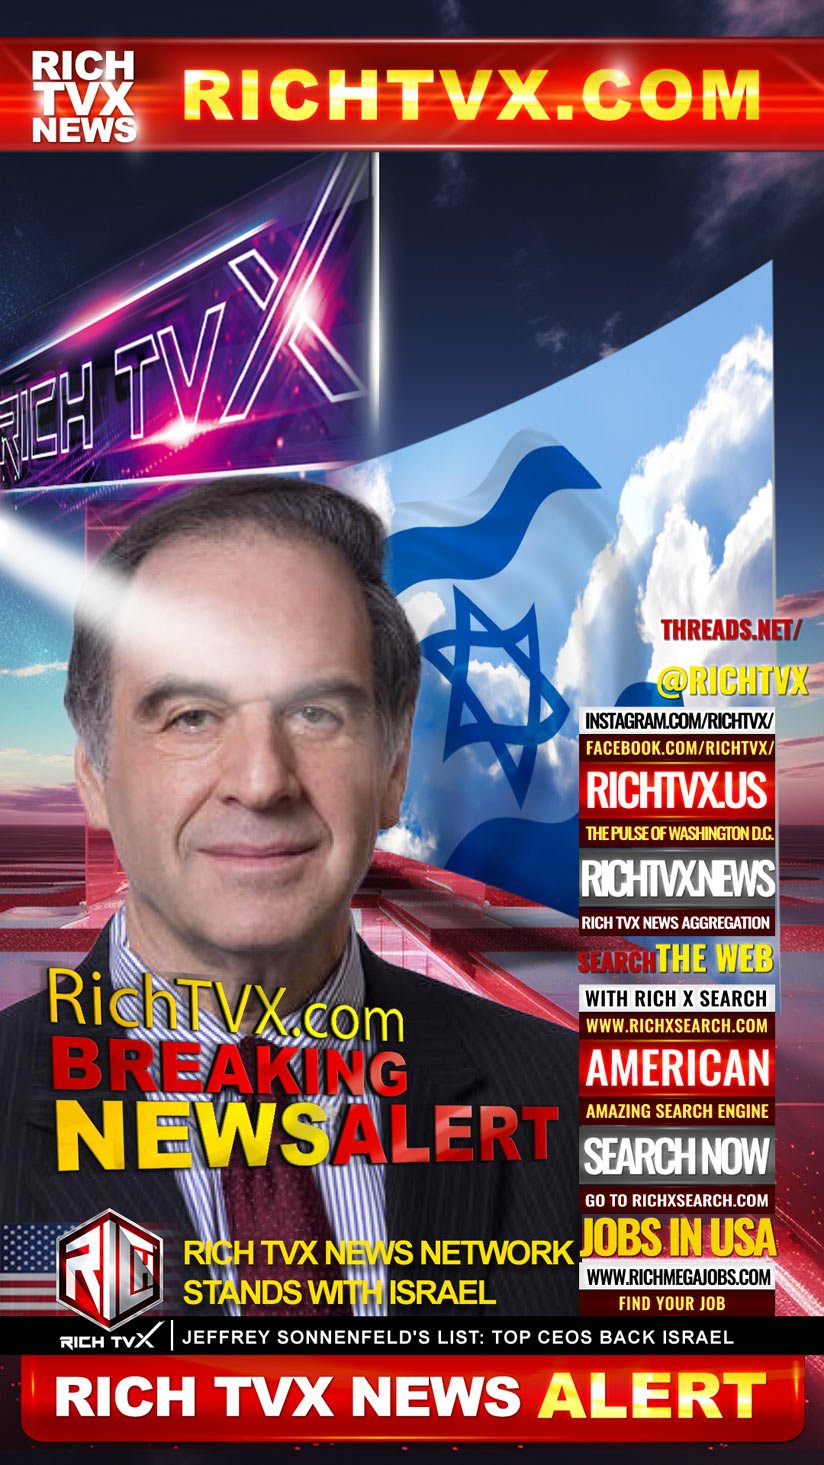 In Unambiguous Declaration, Rich TVX News Network Pledges Support for Israel